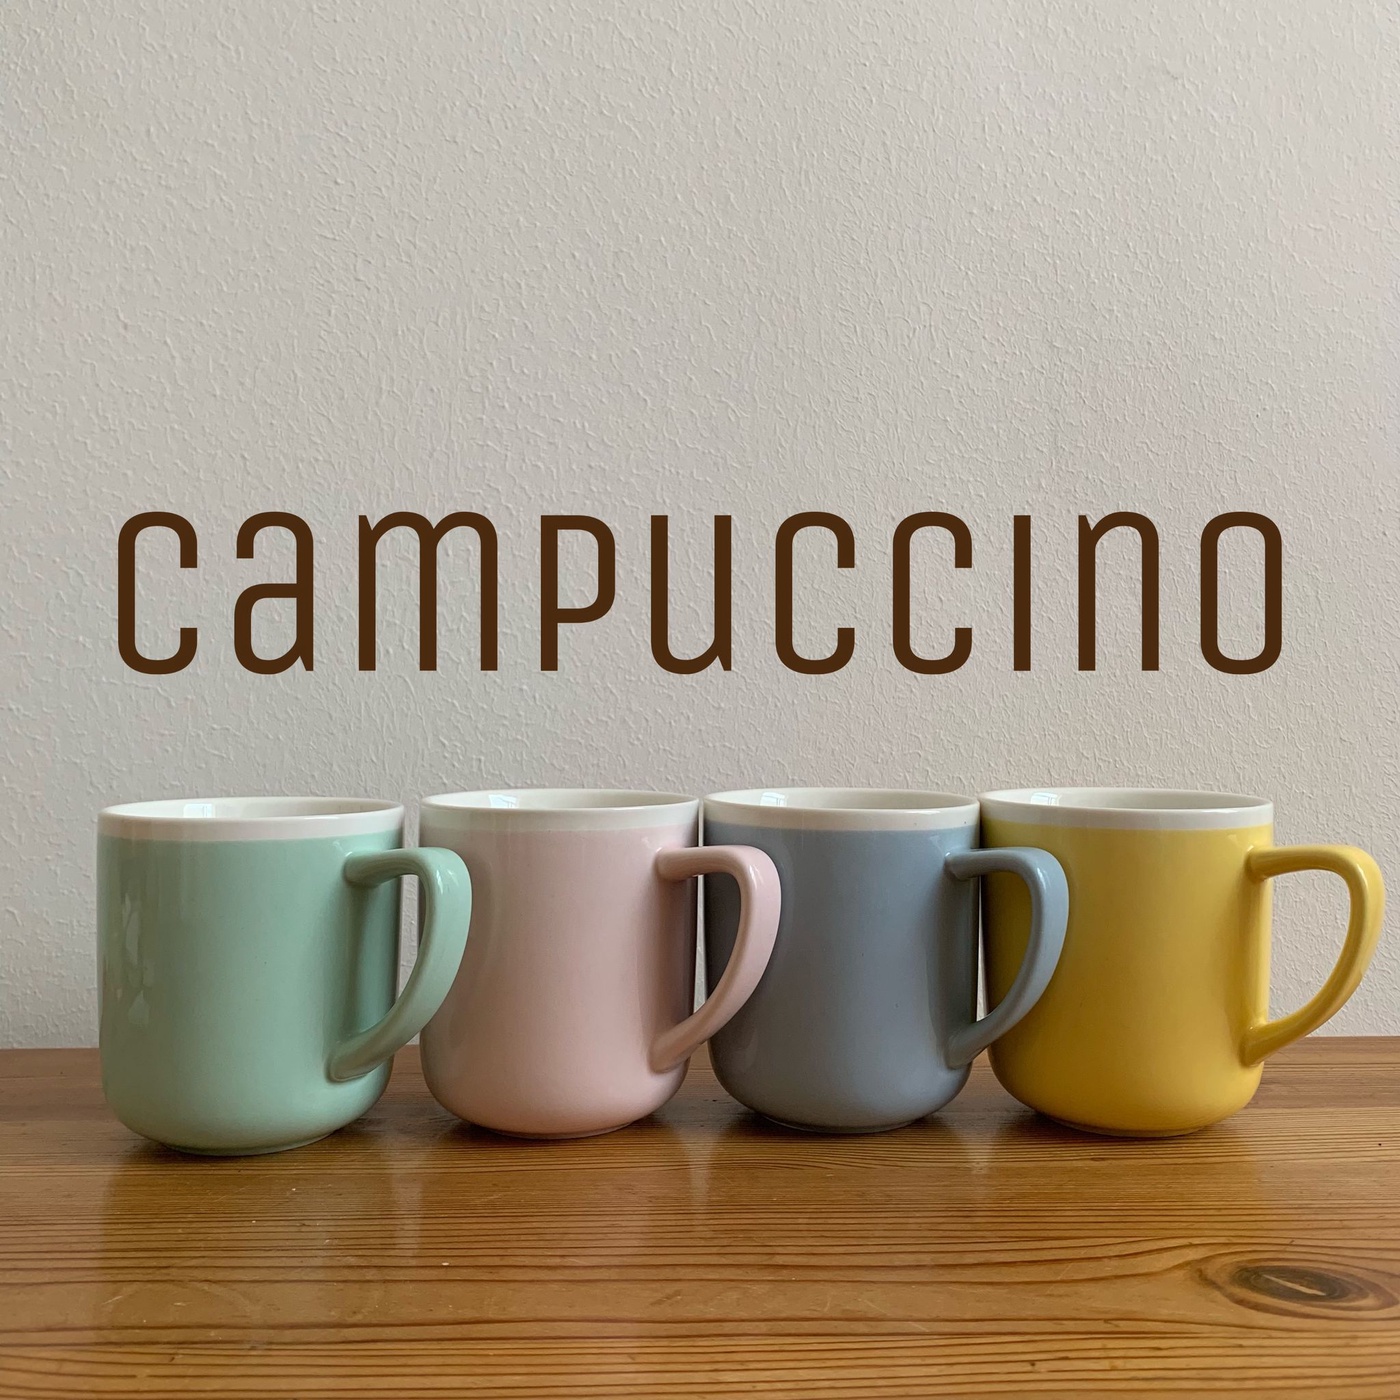 Campuccino